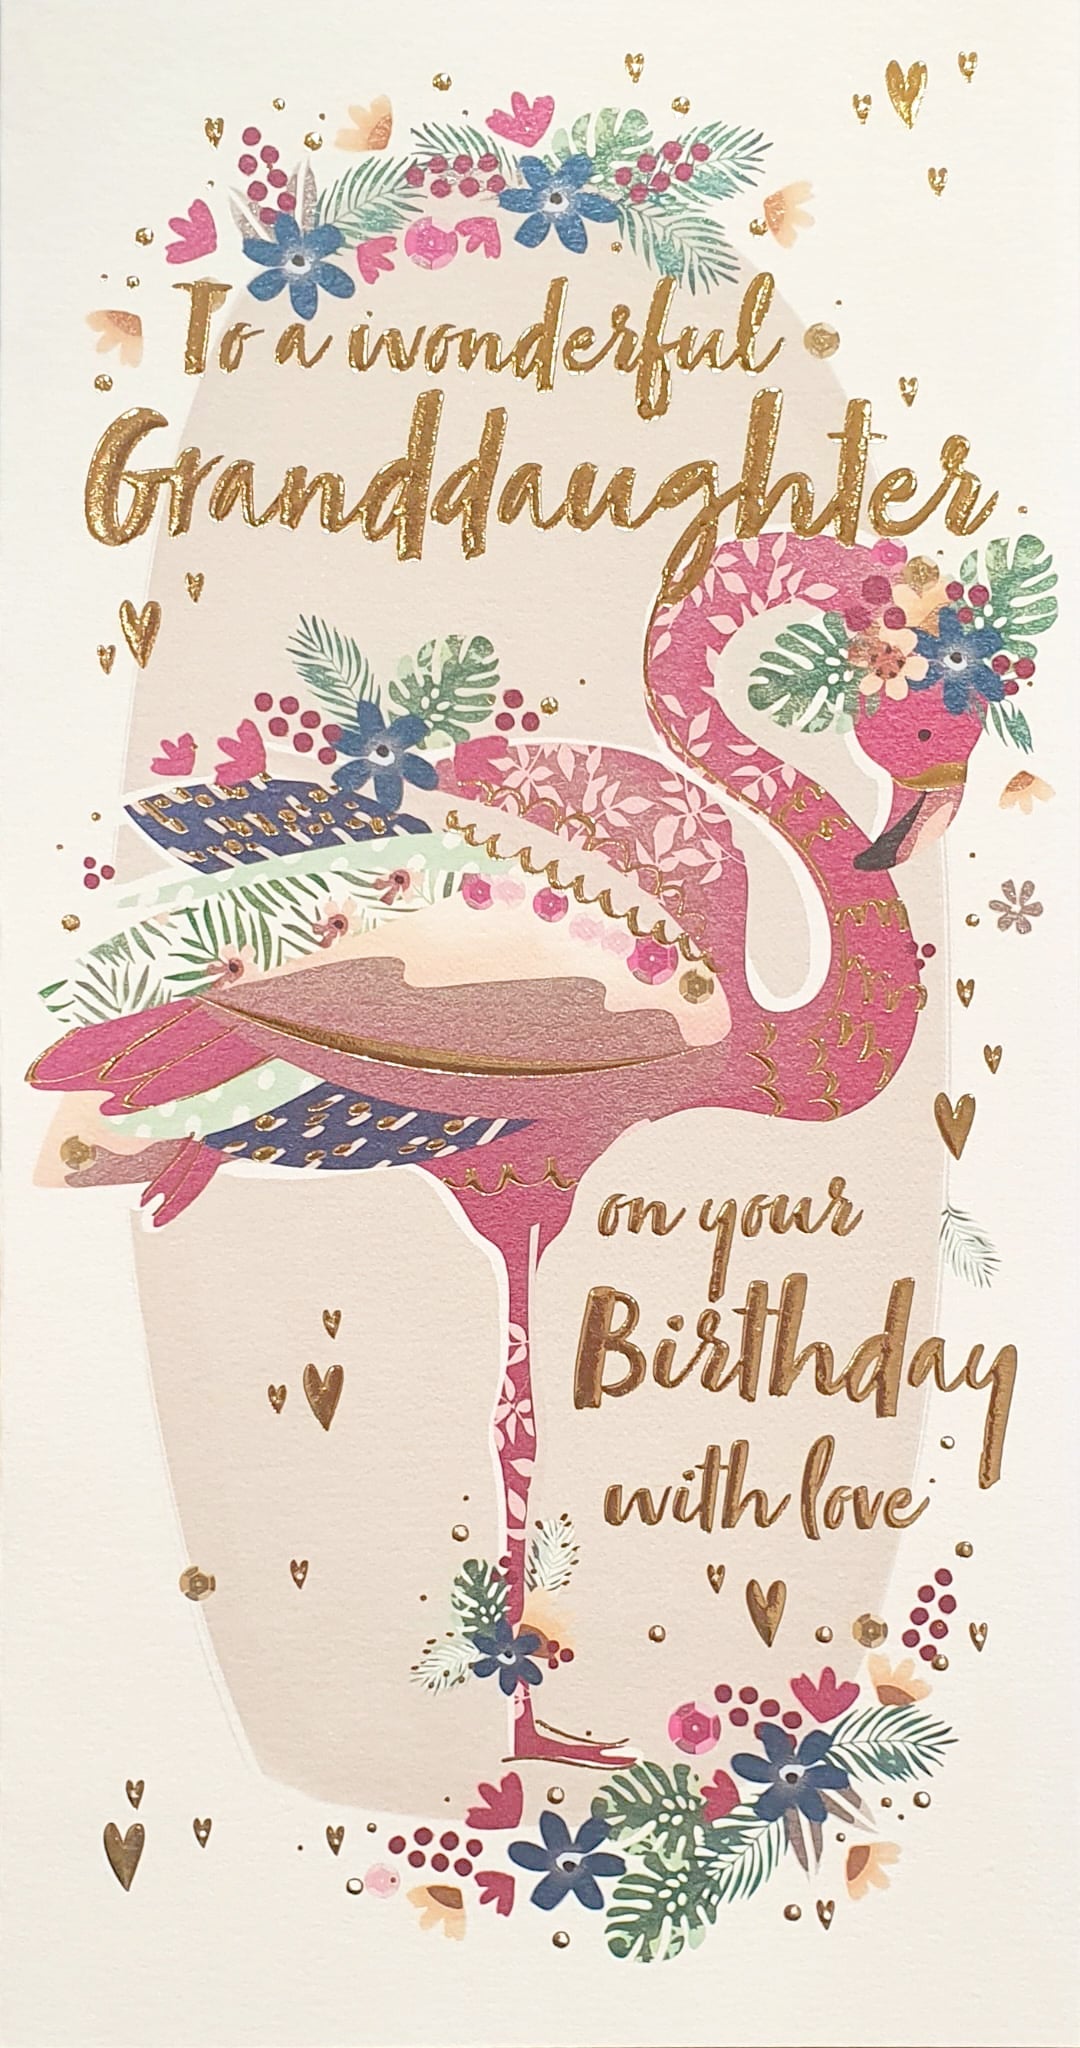 Granddaughter Birthday Card - Flamingo Wishes